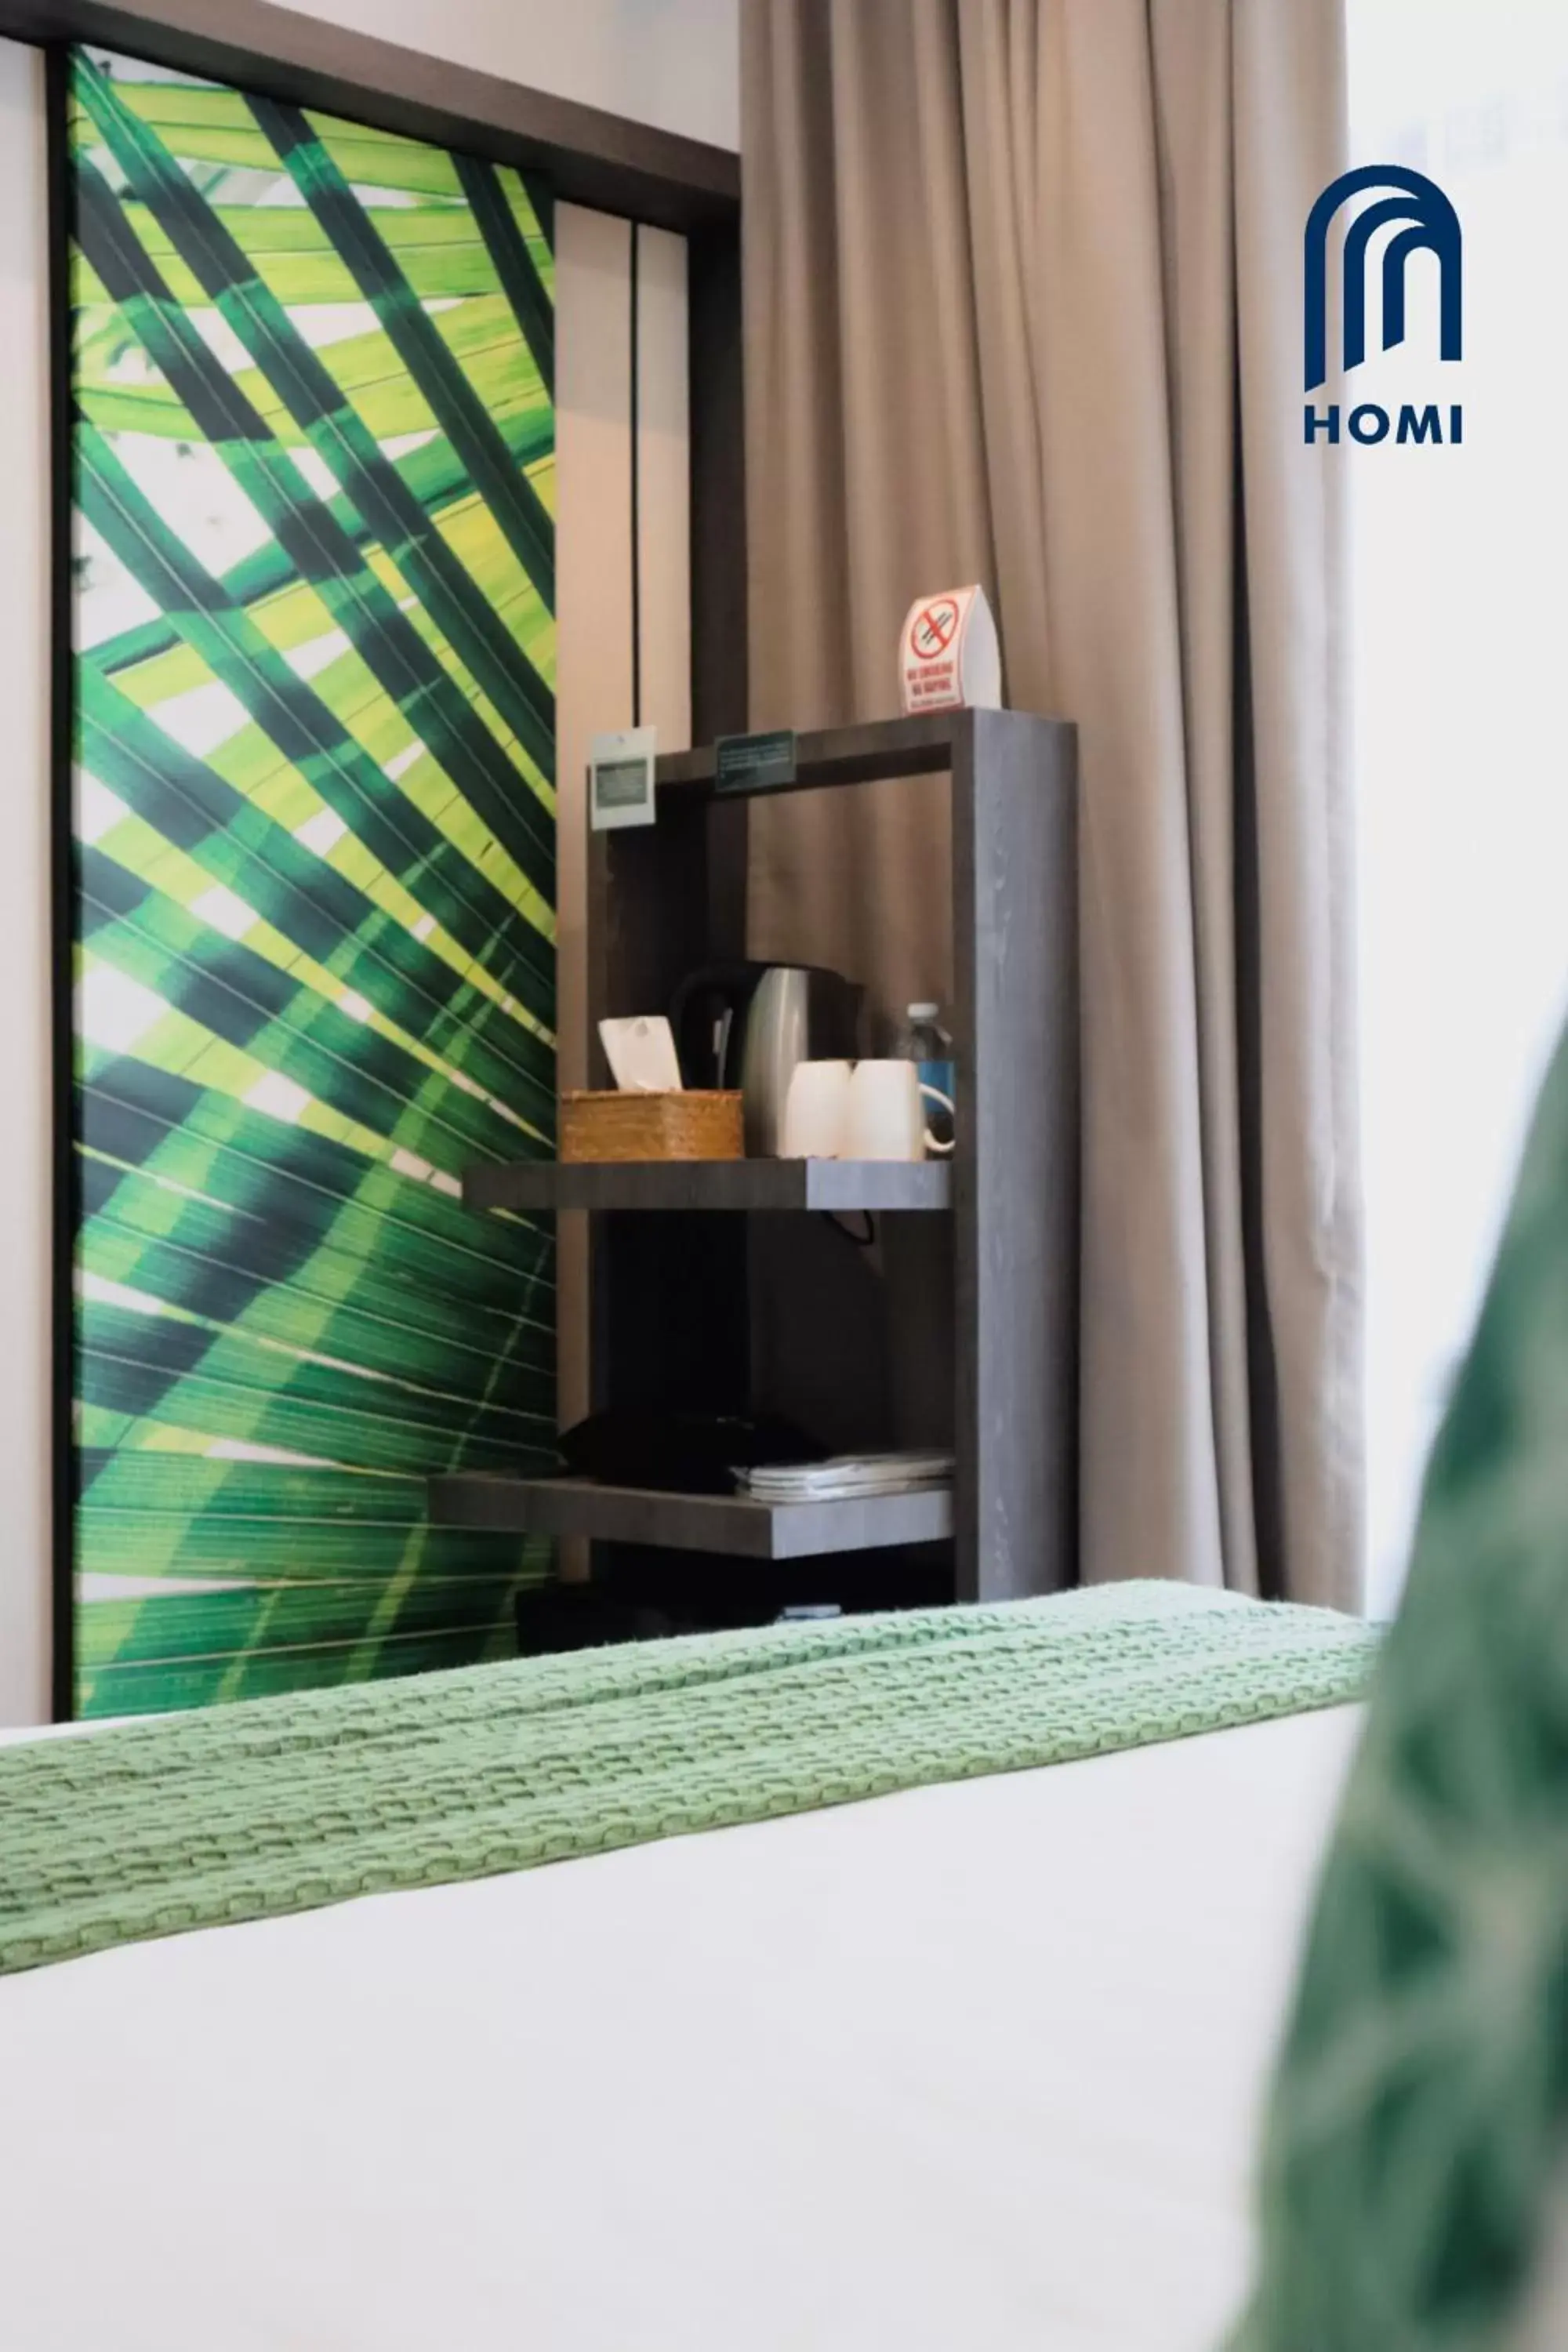 Bed in Homi Oasis 和逸绿洲 near IMAGO Mall